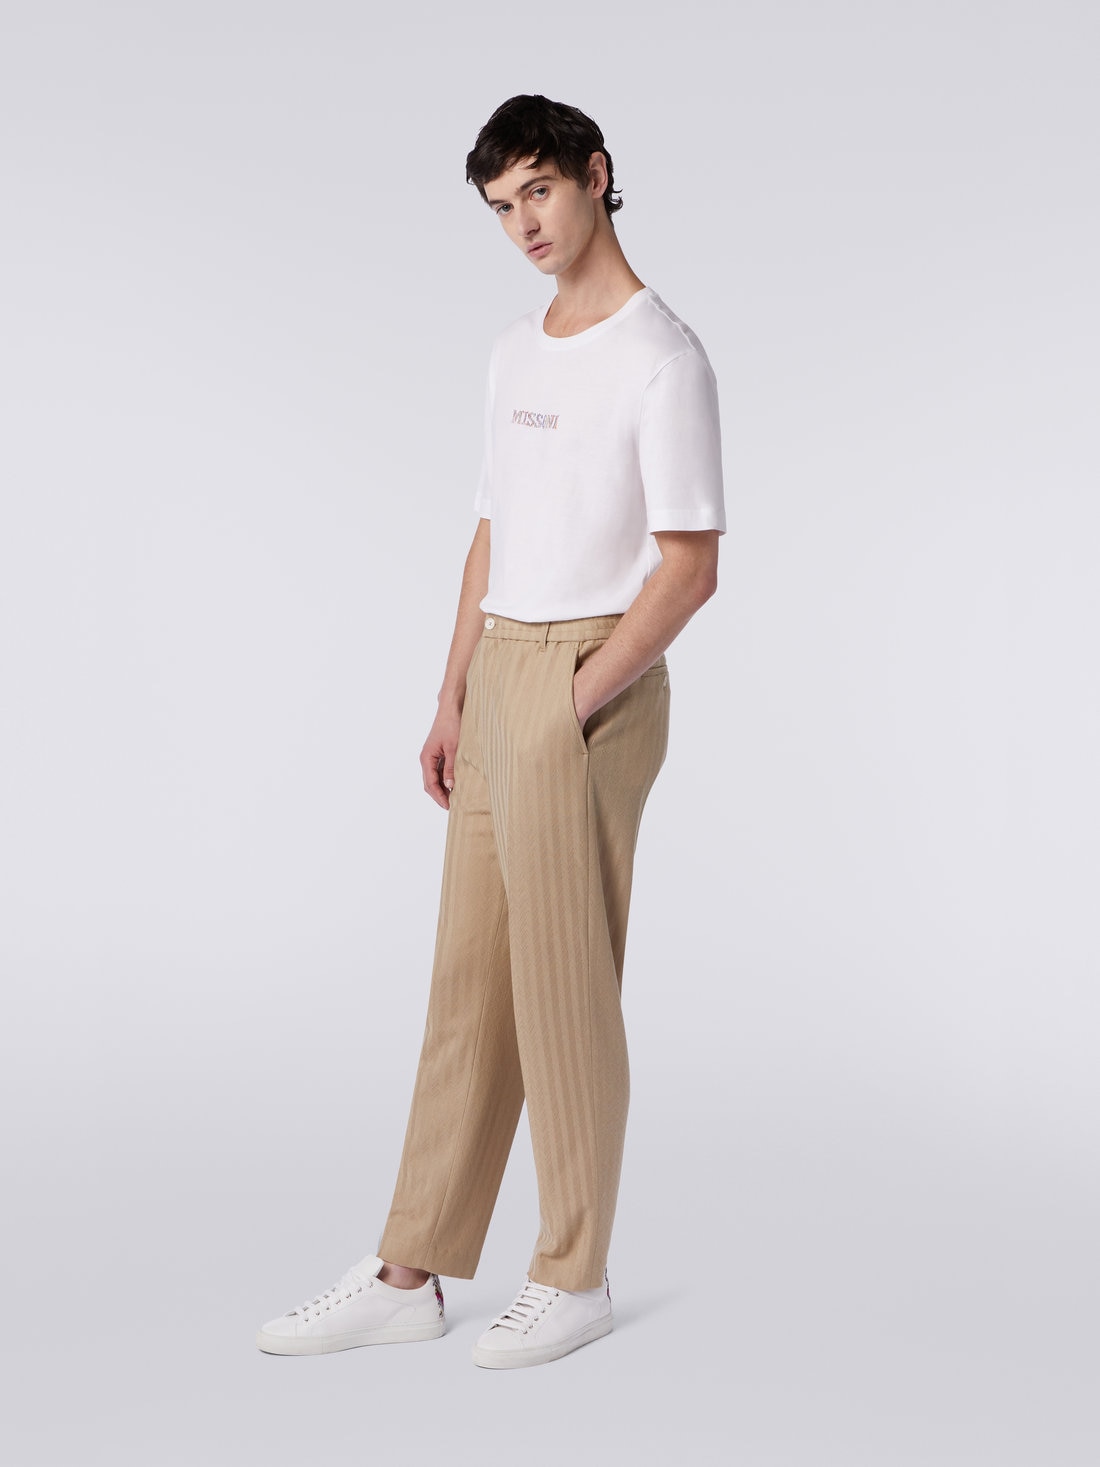 Viscose and cotton chevron trousers with ironed crease, White  - US23SI00BR00L051307 - 2